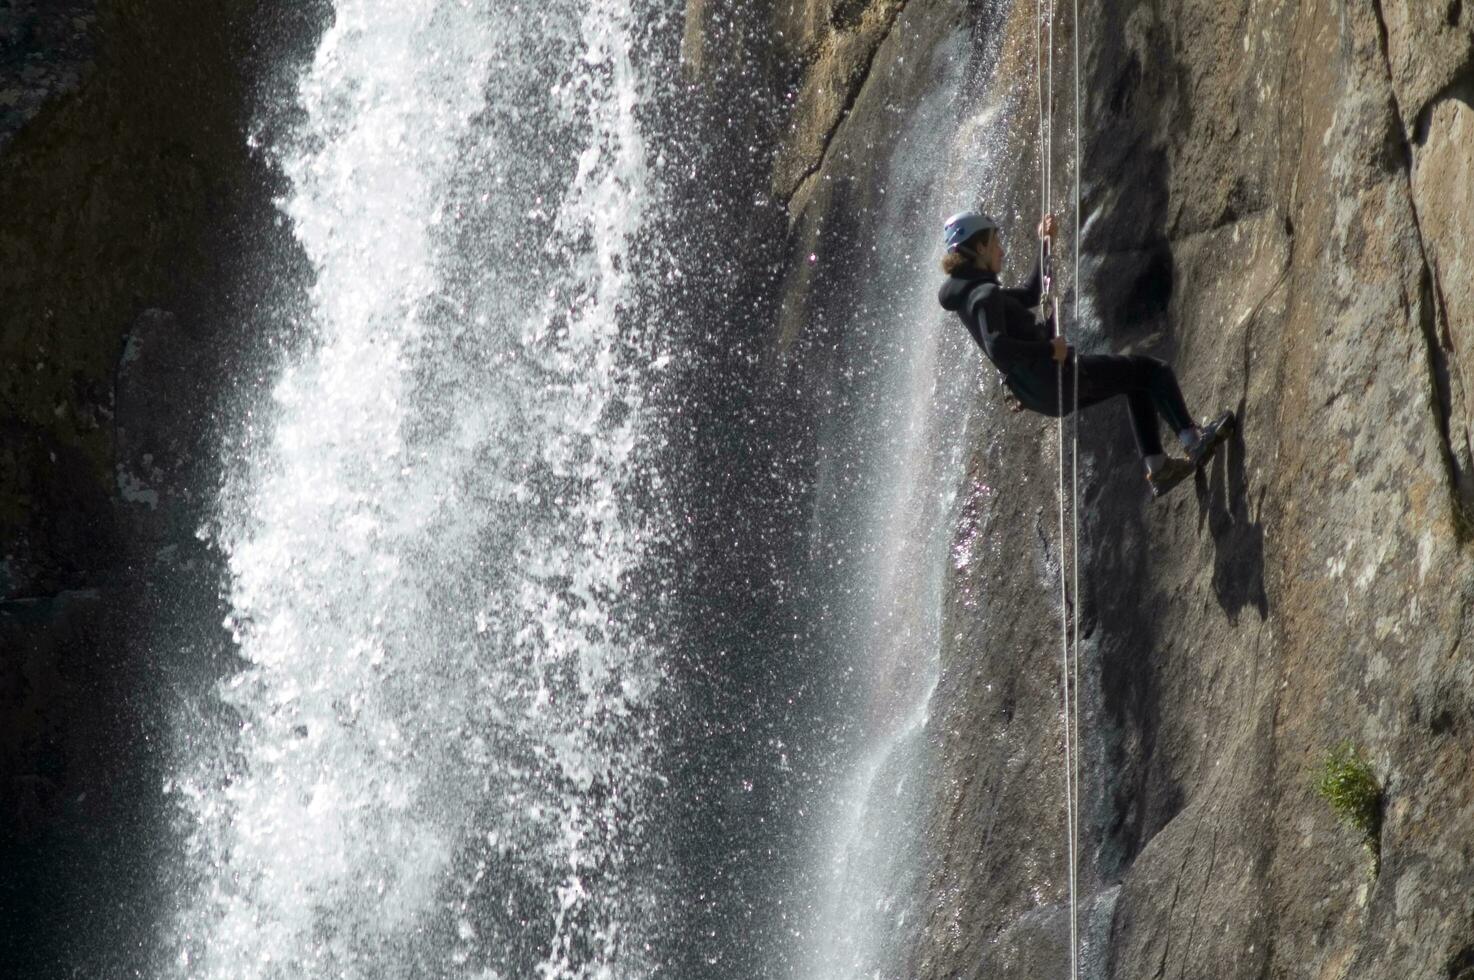 a person on a rope climbing up a waterfall photo